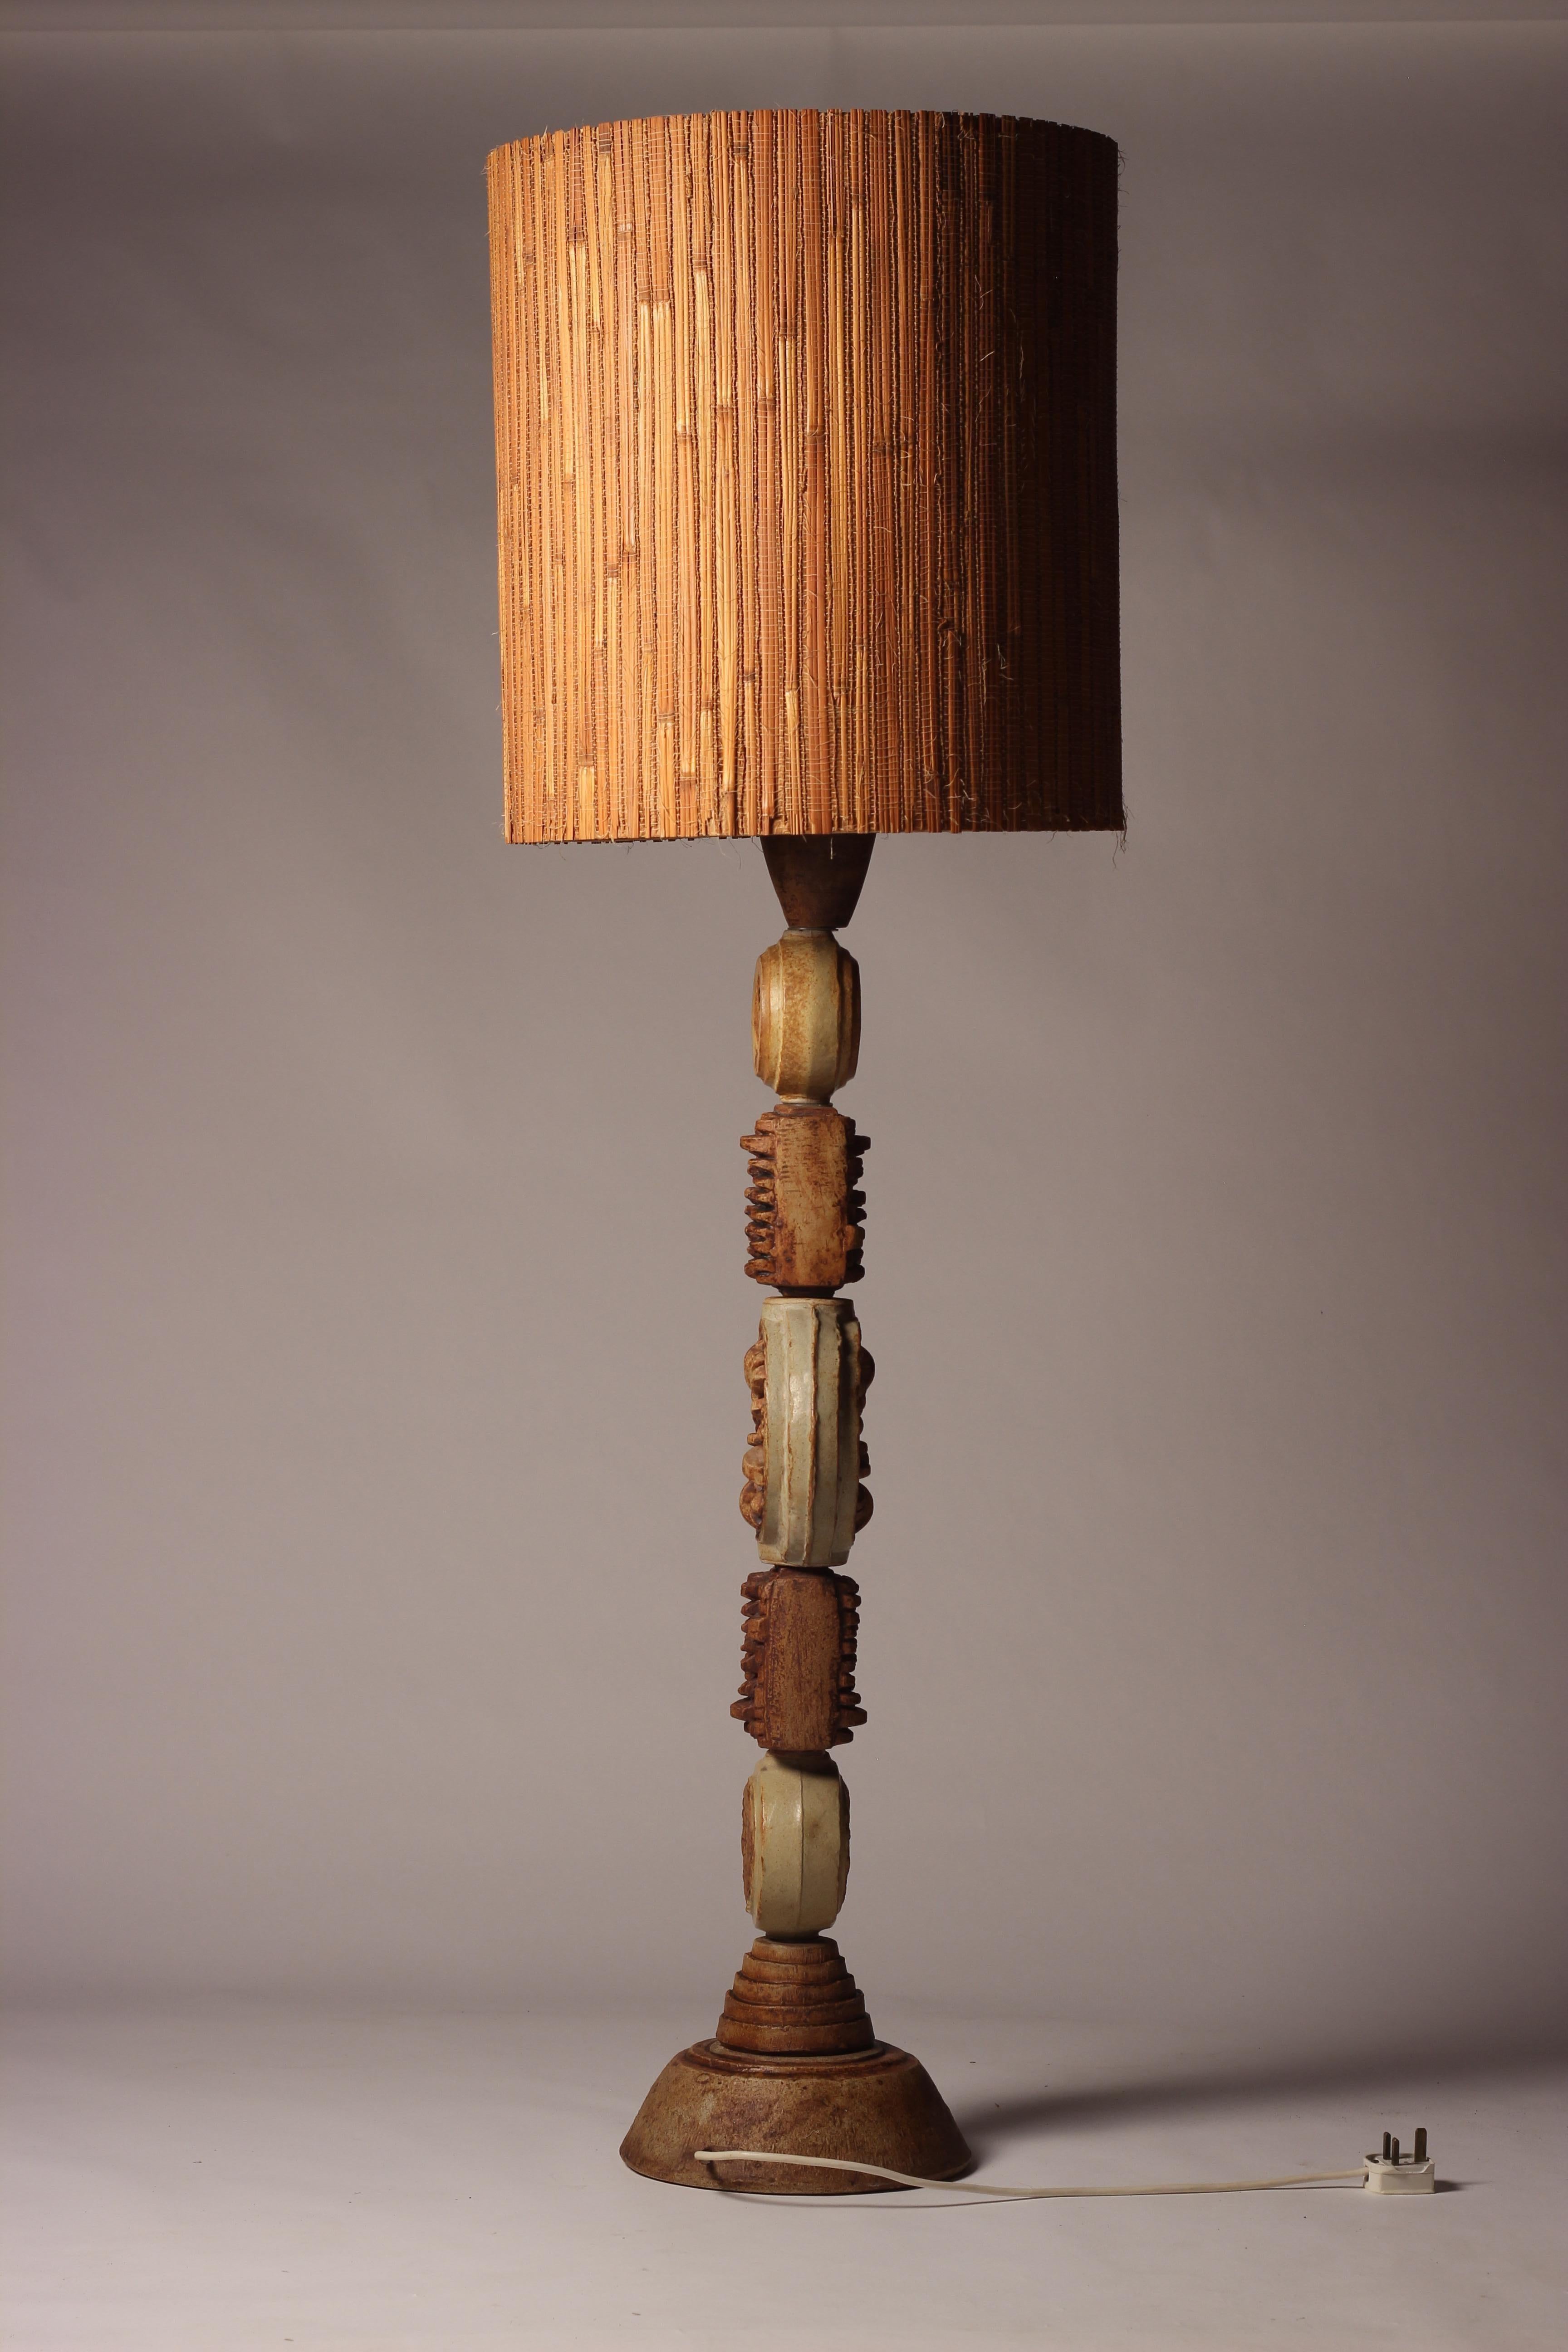 A Bernard Rooke Totem floor lamp ht 106 cm x dia at base 27cm ht including original shade 151cm 
Shade dia 46cm x 50.6 ht

This light is easily unassembled for cost affective shipping. We can also rewire for all regions.
 
A heavy ceramic TOTEM